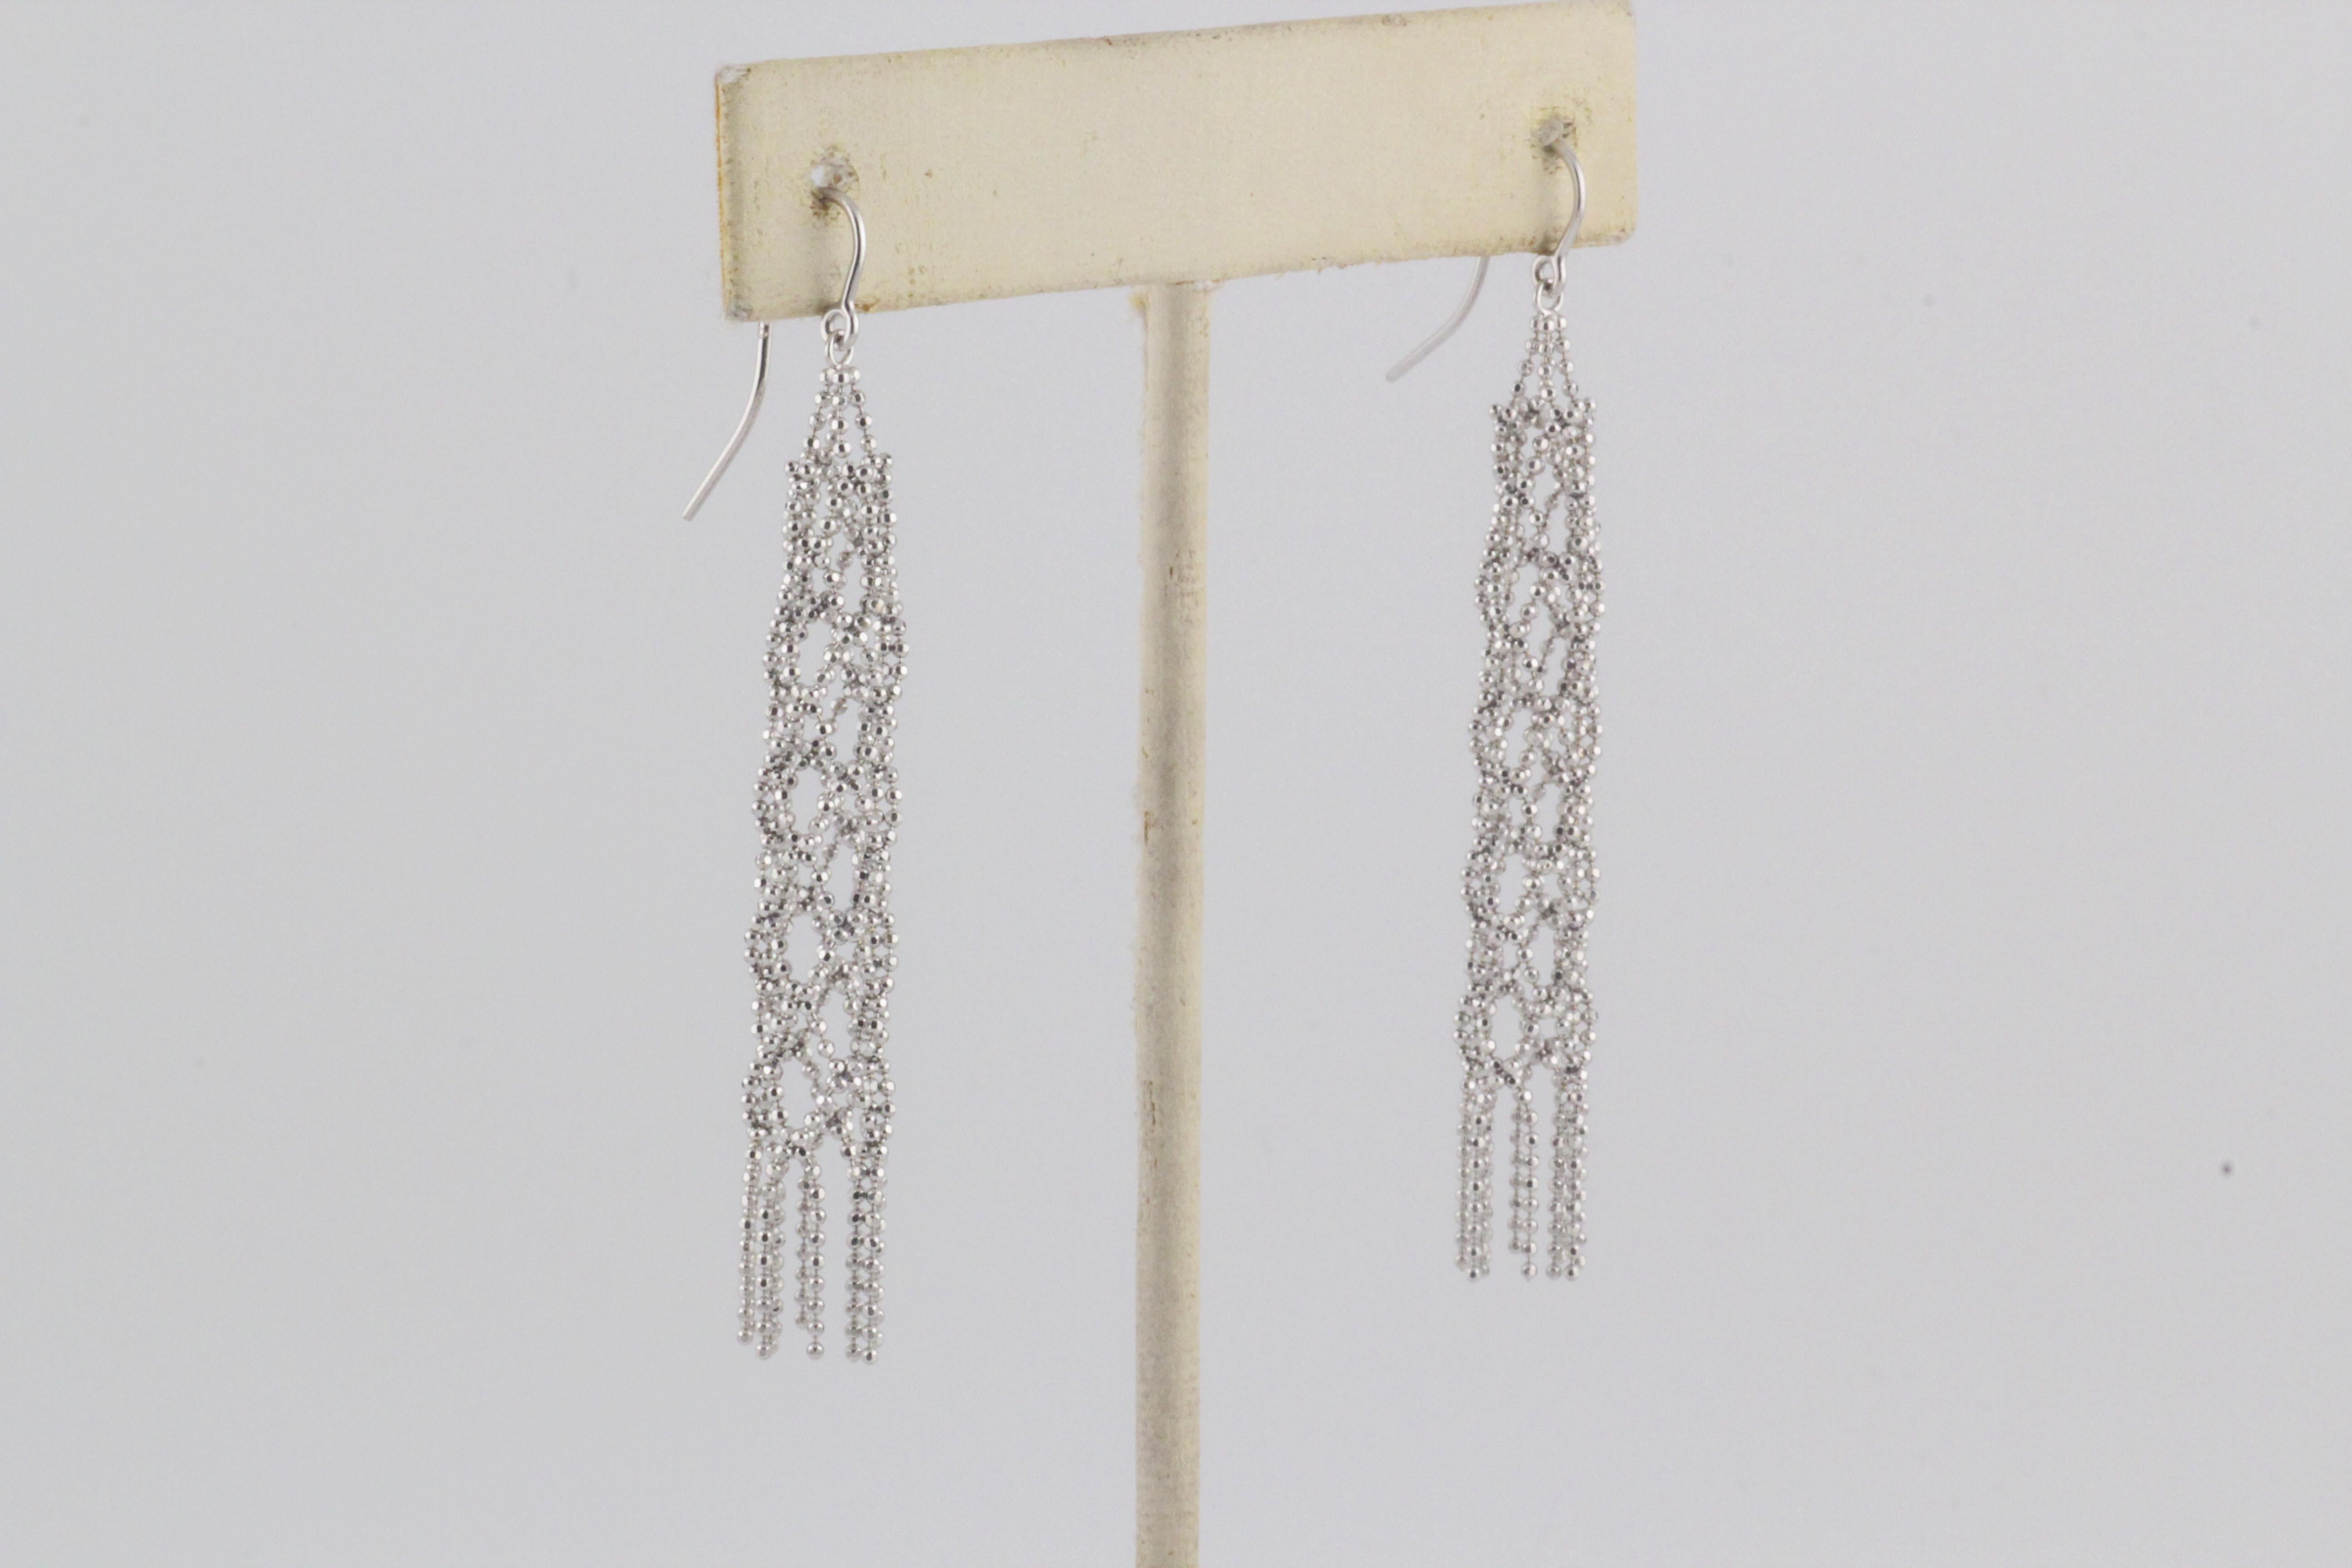 The Tiffany & Co. 18K White Gold Fringe Bead Tassel Drop Dangle Braided Earrings are a stunning embodiment of elegance and modern sophistication. Crafted by the renowned jewelry house Tiffany & Co., these earrings showcase exquisite design and